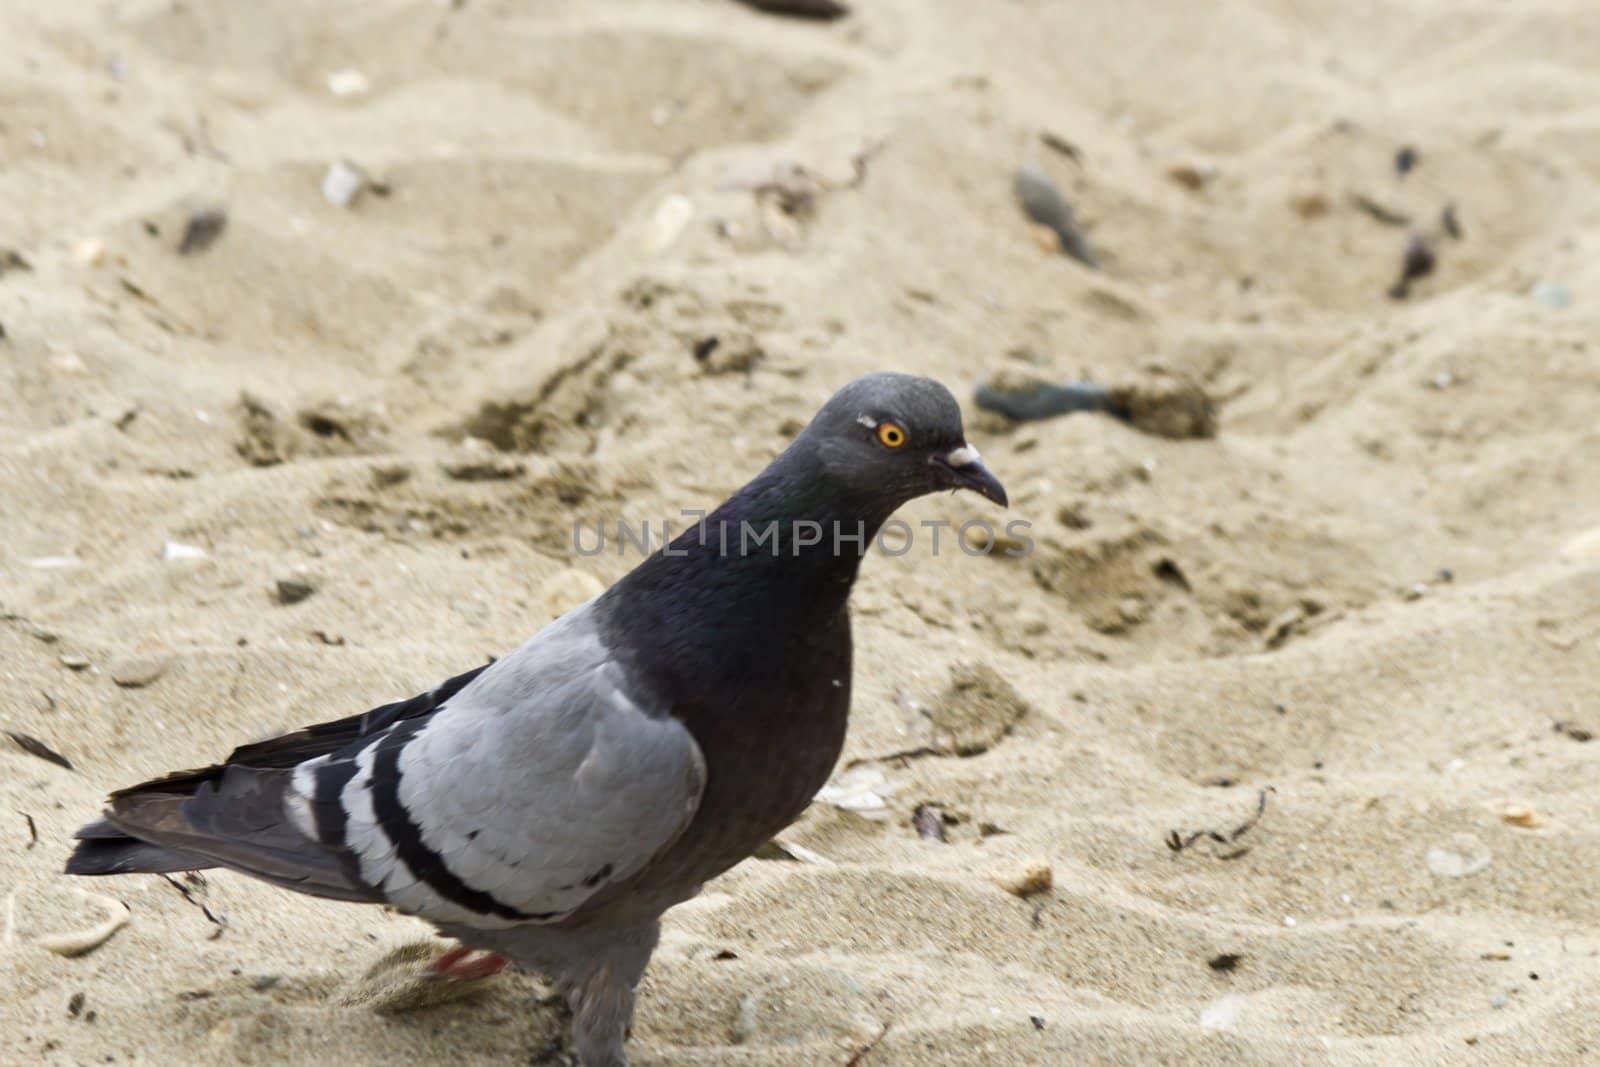 The pigeon goes on sand of a sea beach